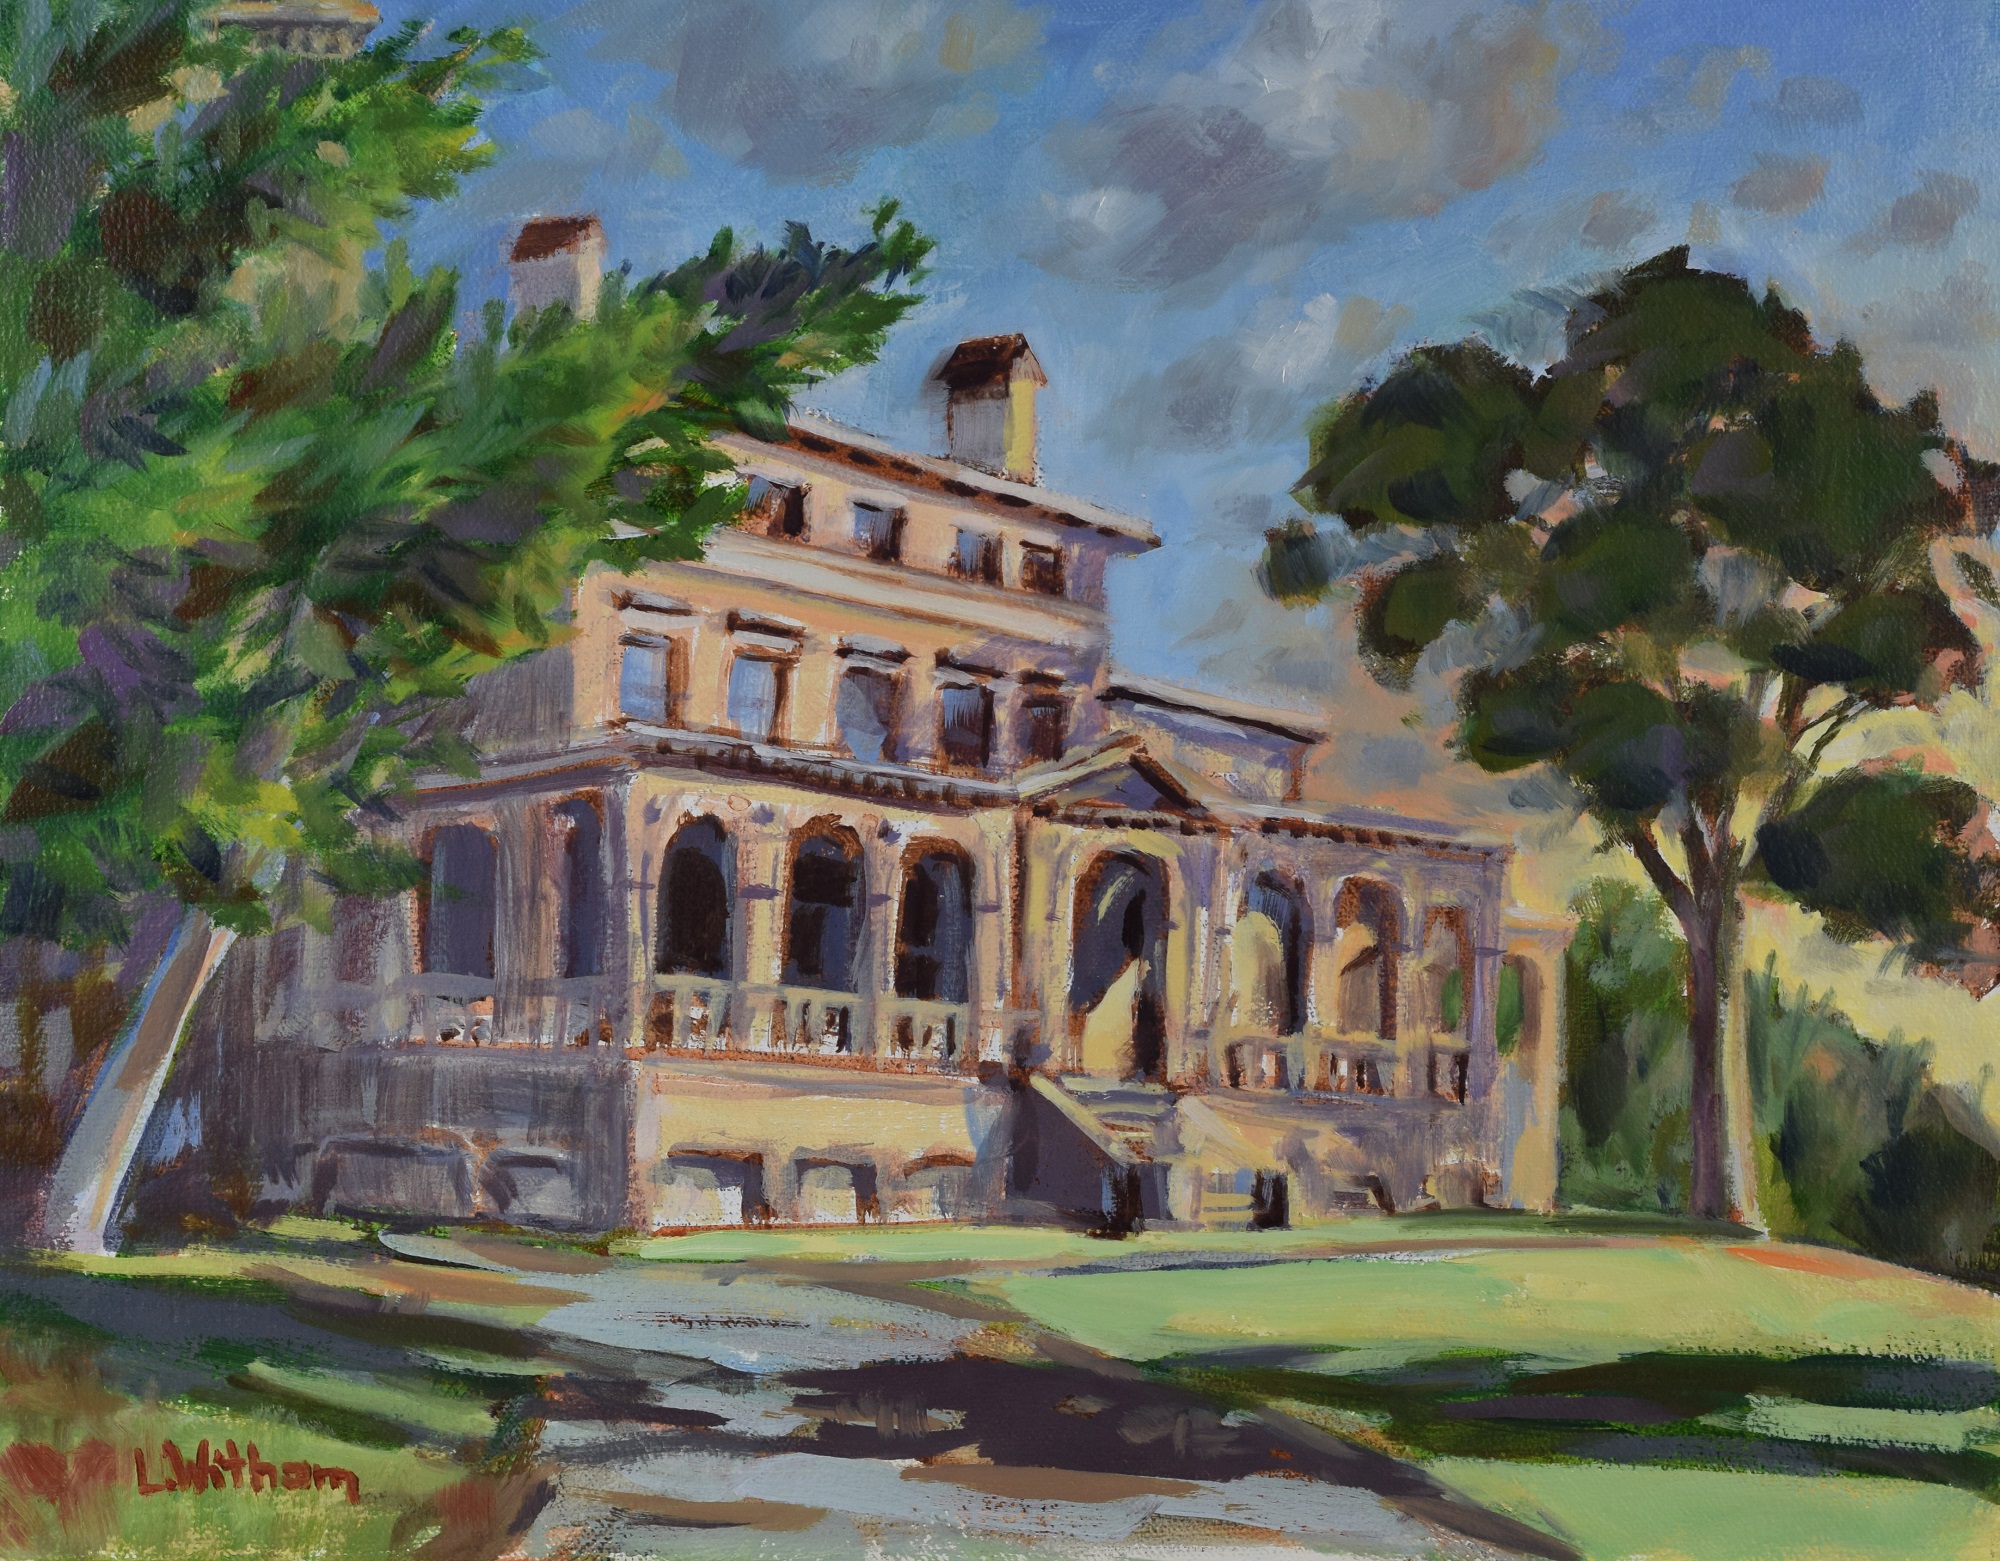 Clifton Mansion, Oil and acrylic on canvas, 11x14